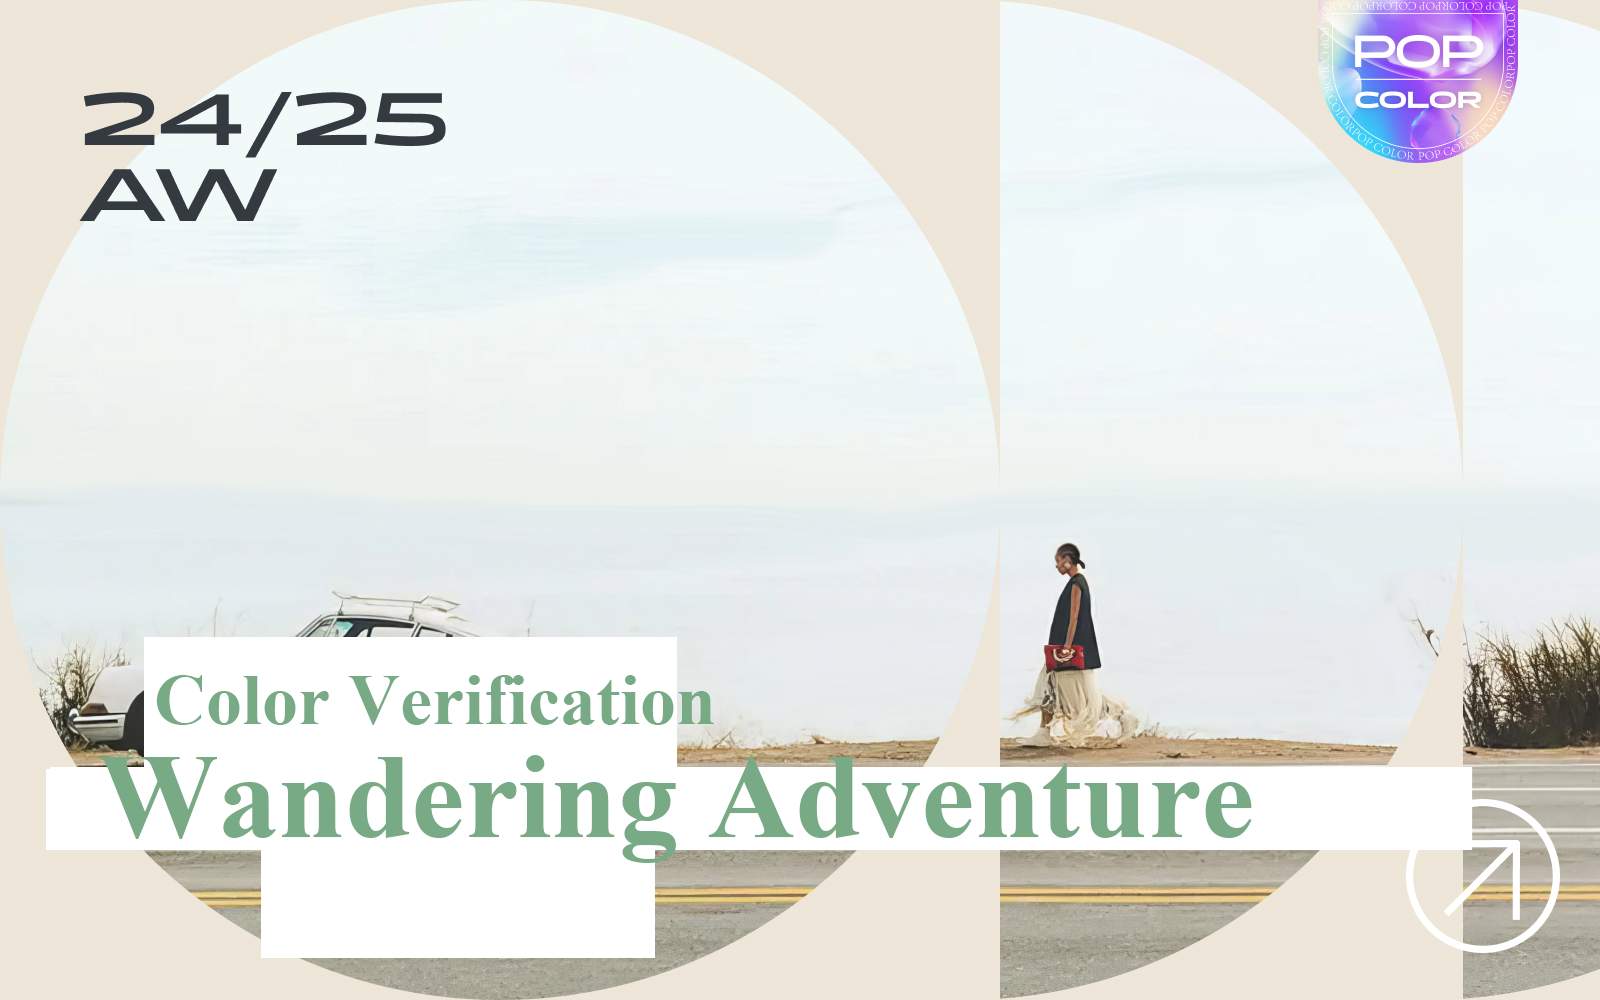 Wandering Adventure - The Thematic Color Verification of Womenswear